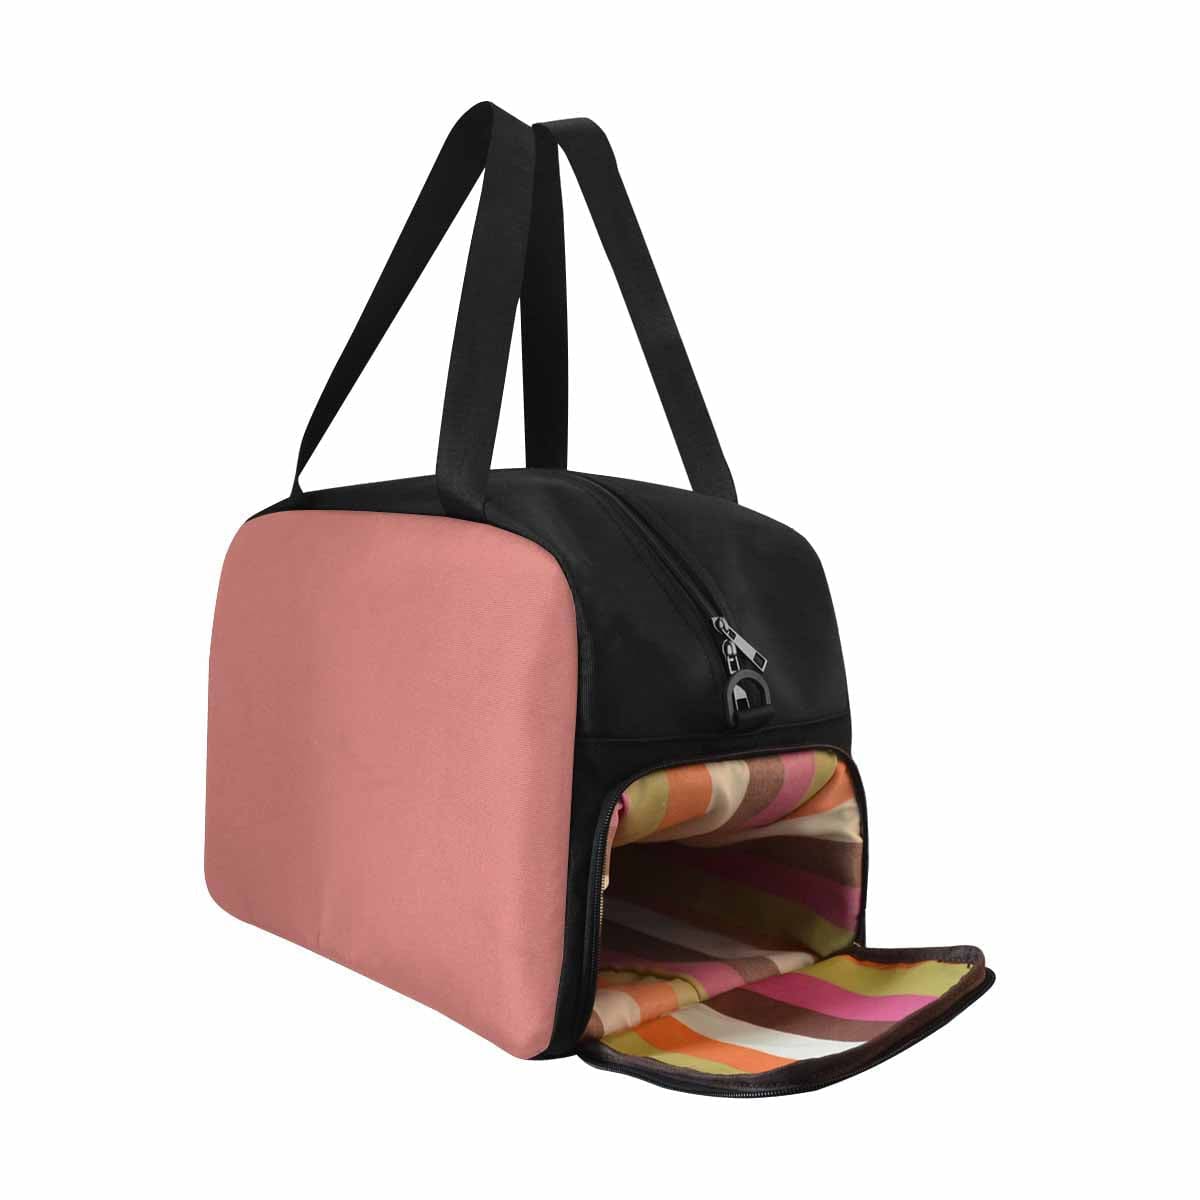 Tiger Lily Pink Tote And Crossbody Travel Bag - Bags | Travel Bags | Crossbody